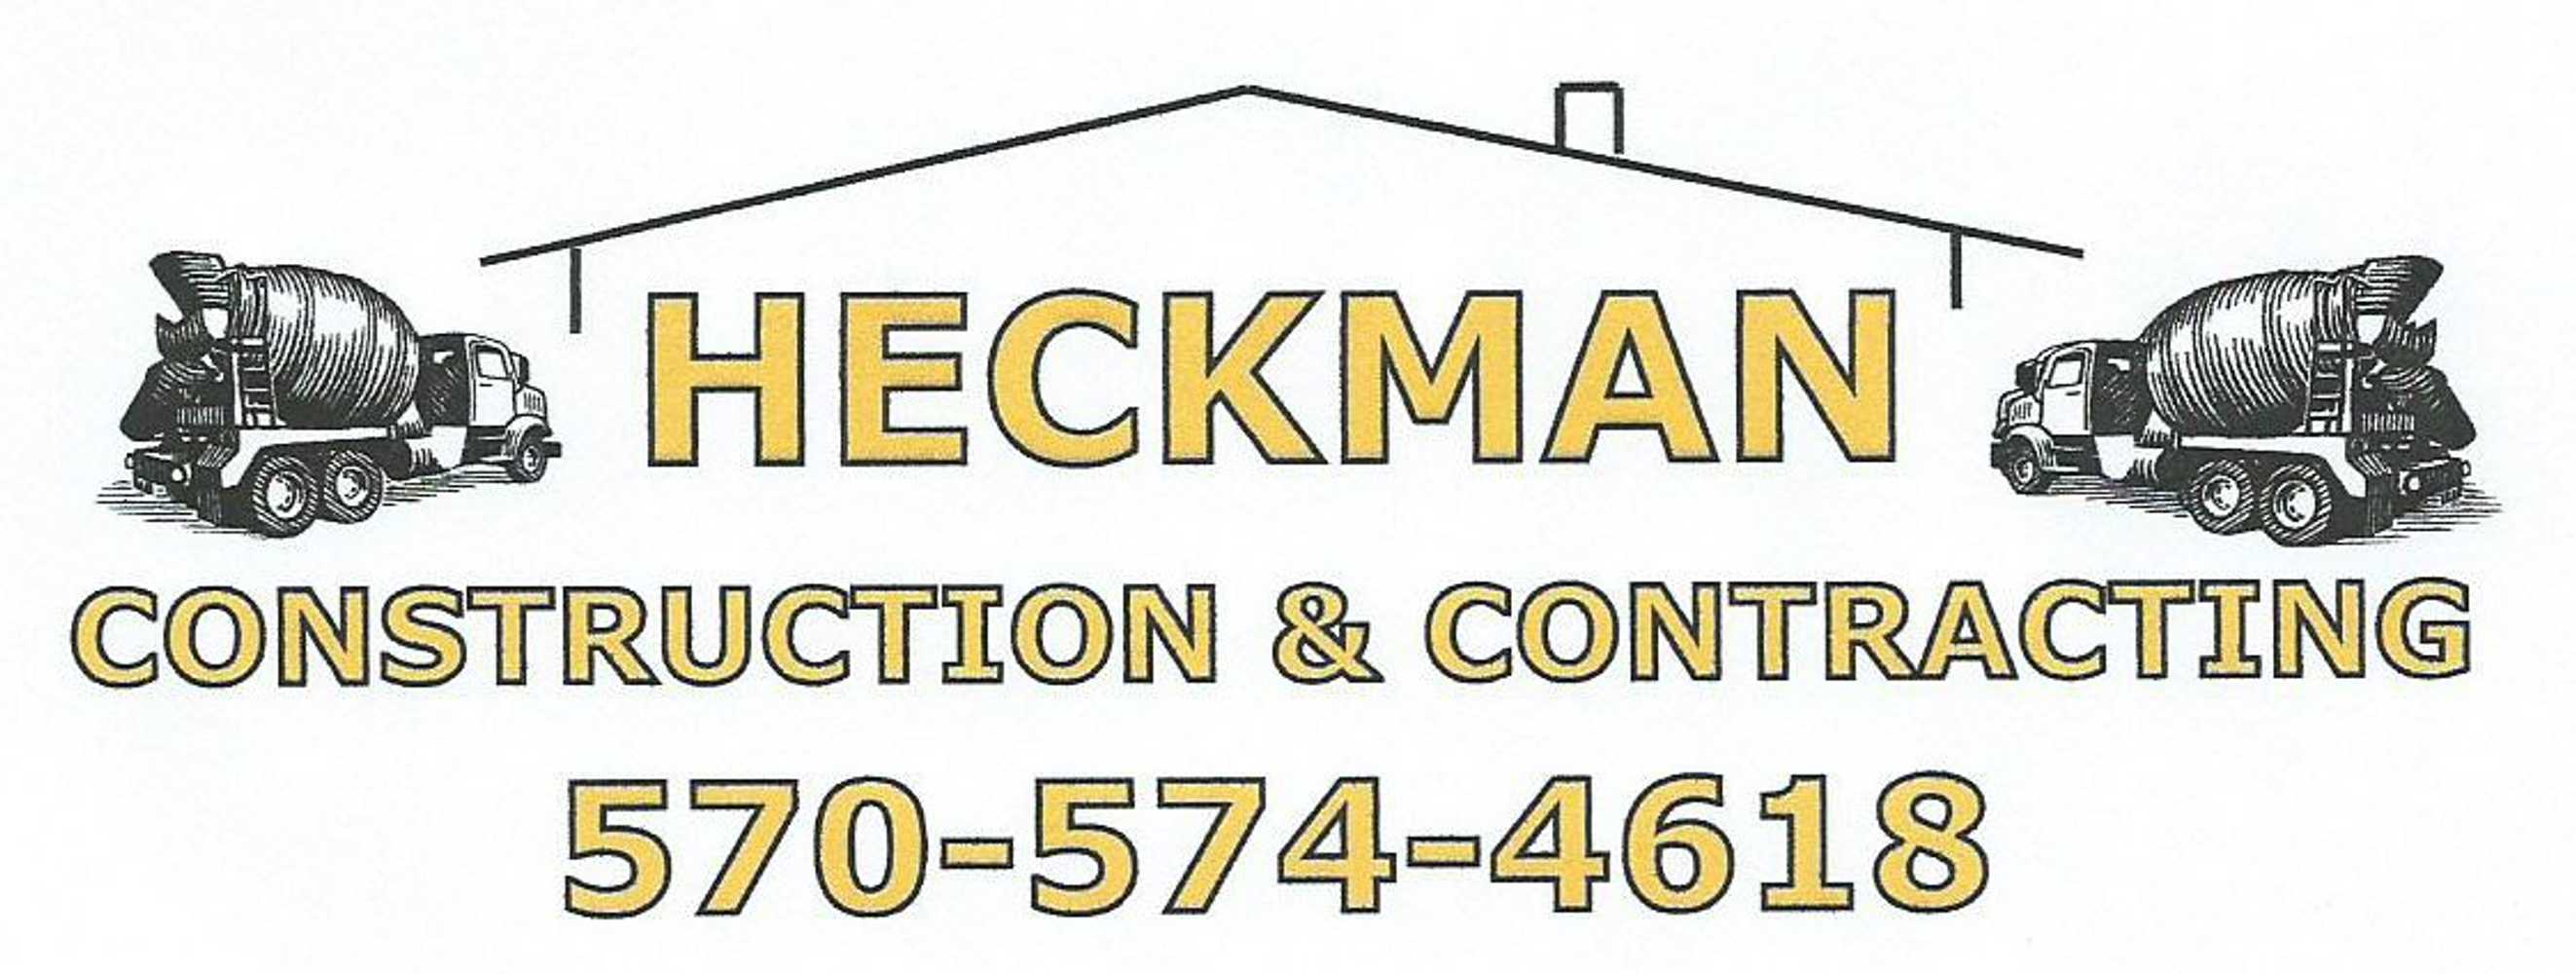 Heckman Construction And Contracting Project